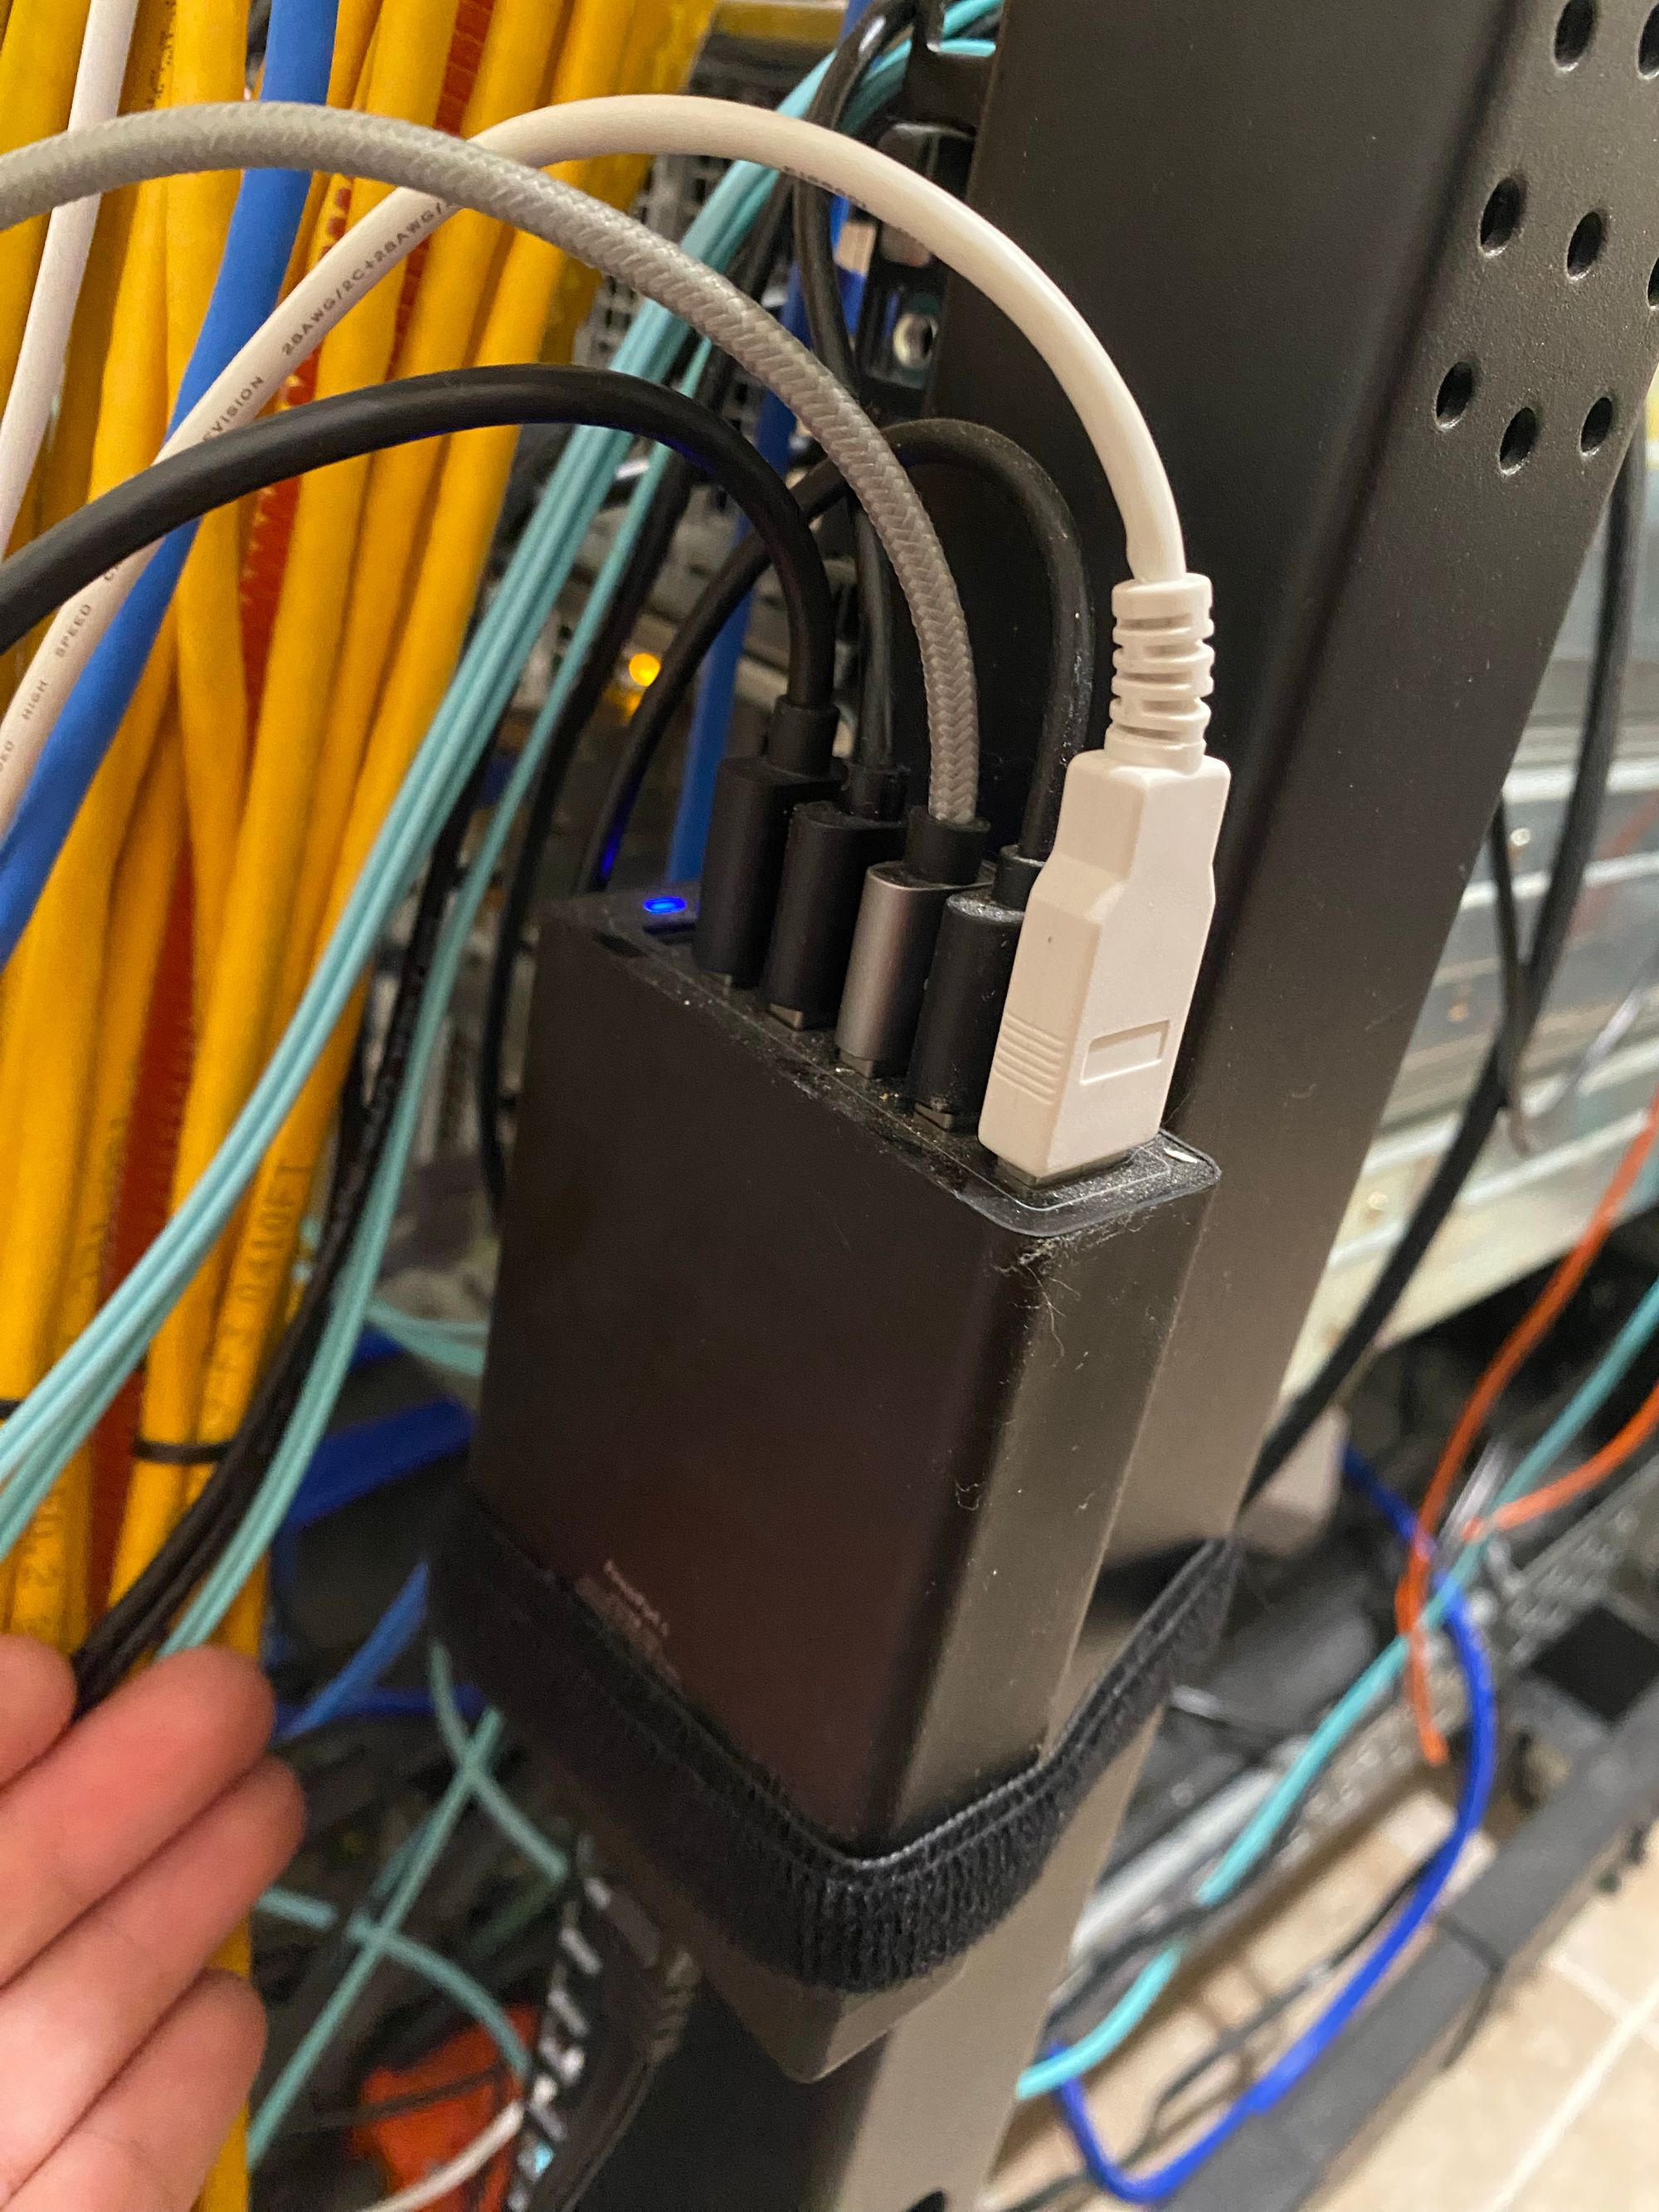 Home Network Cable Management Guide 2022 